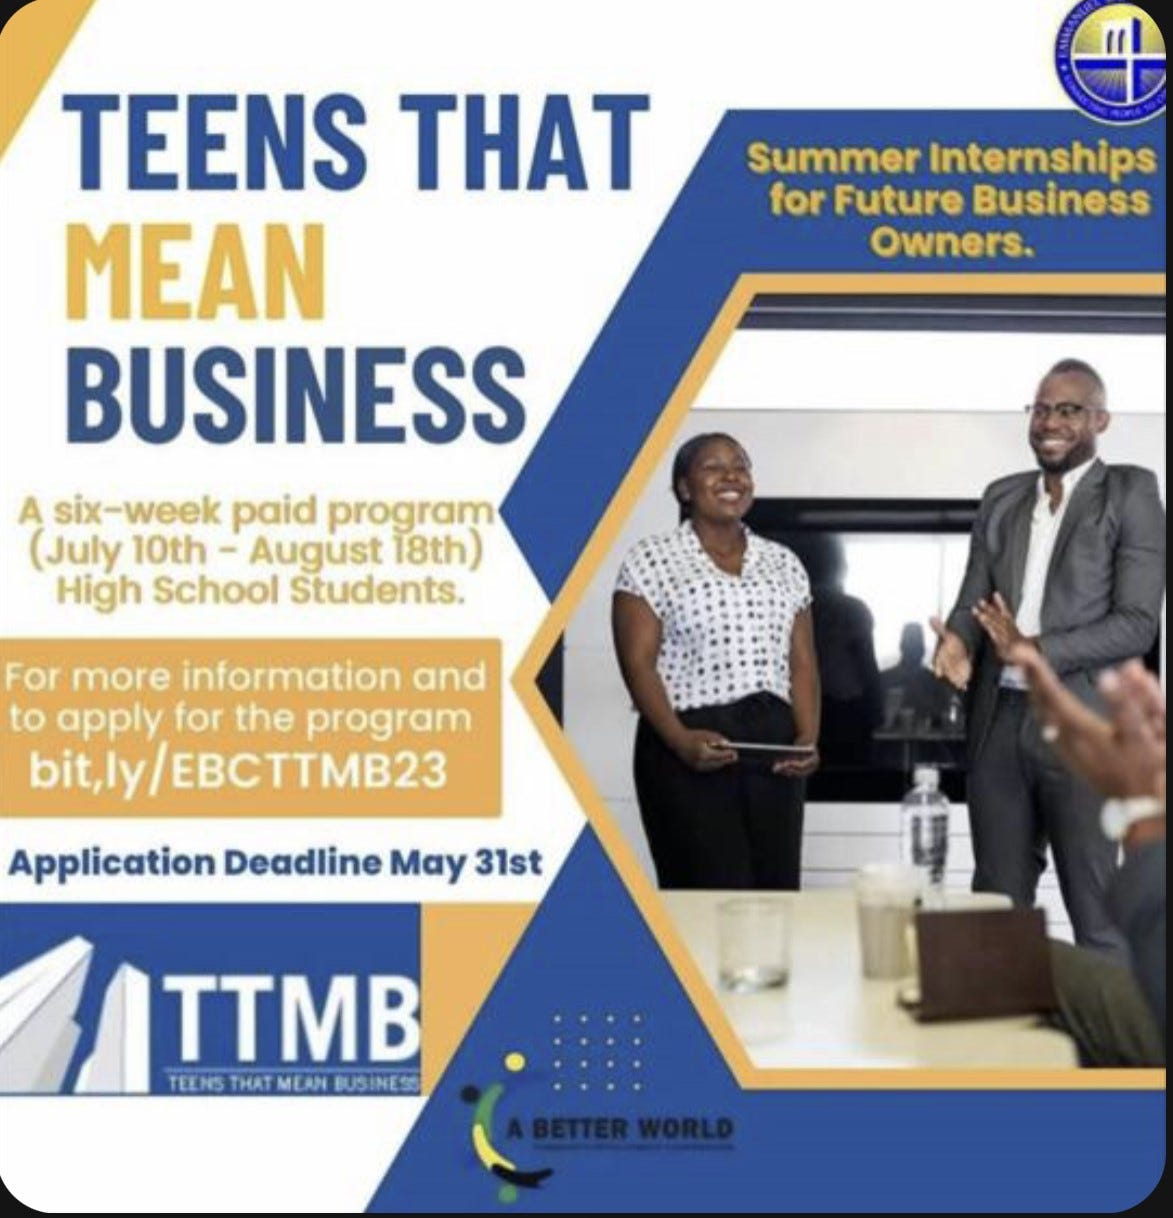 Teens That Mean Business Summer Internships for Future Business Owners